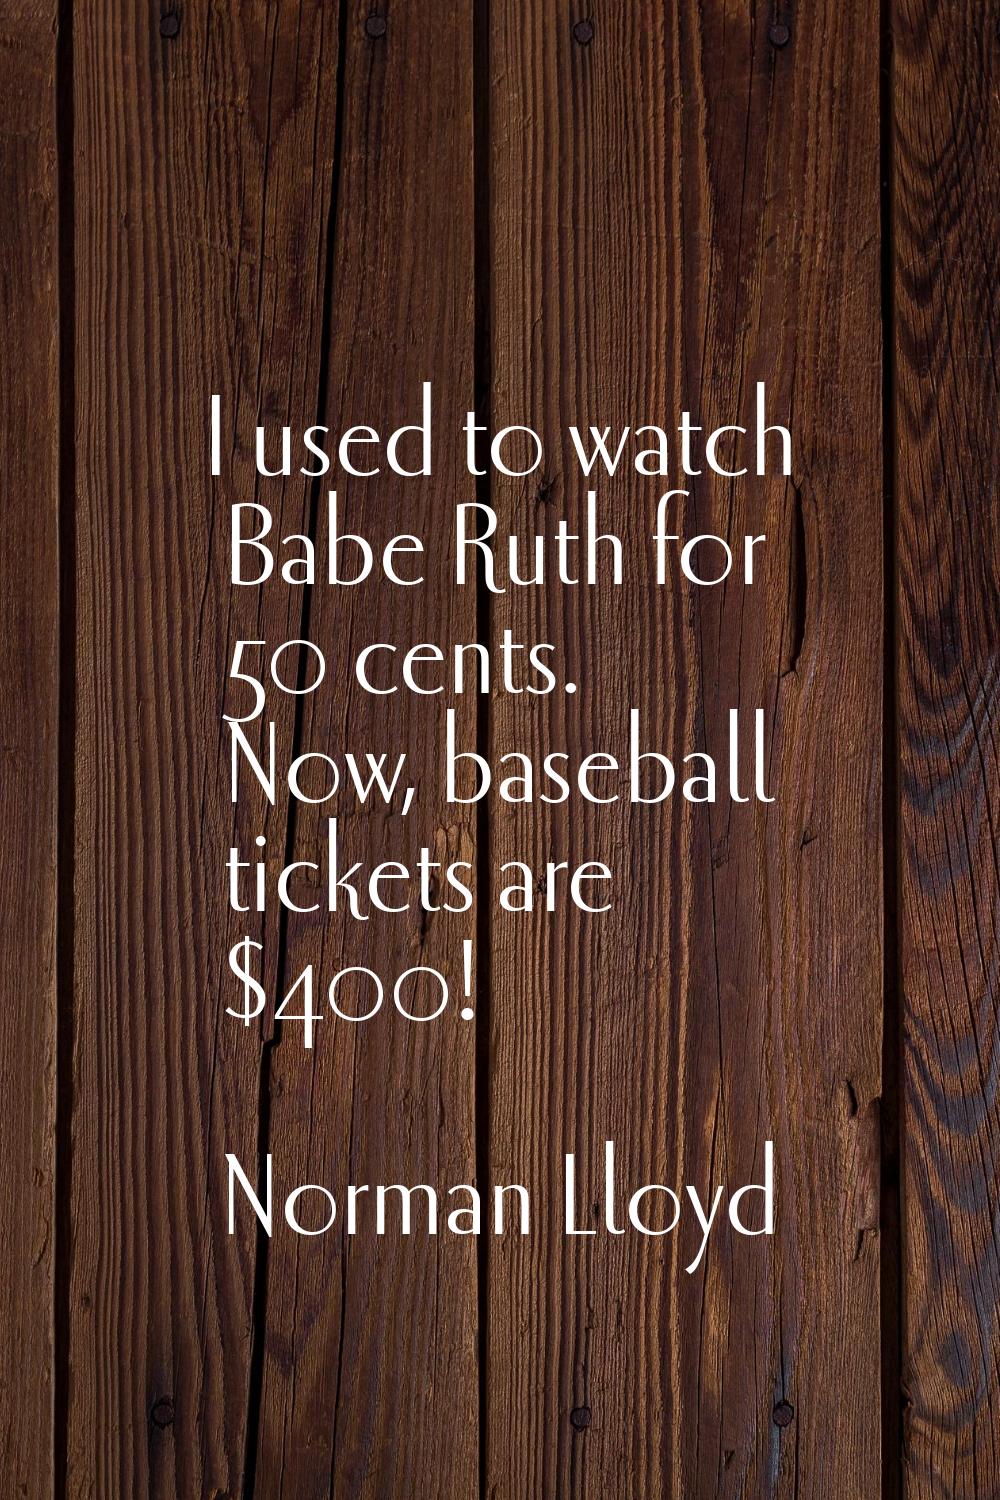 I used to watch Babe Ruth for 50 cents. Now, baseball tickets are $400!